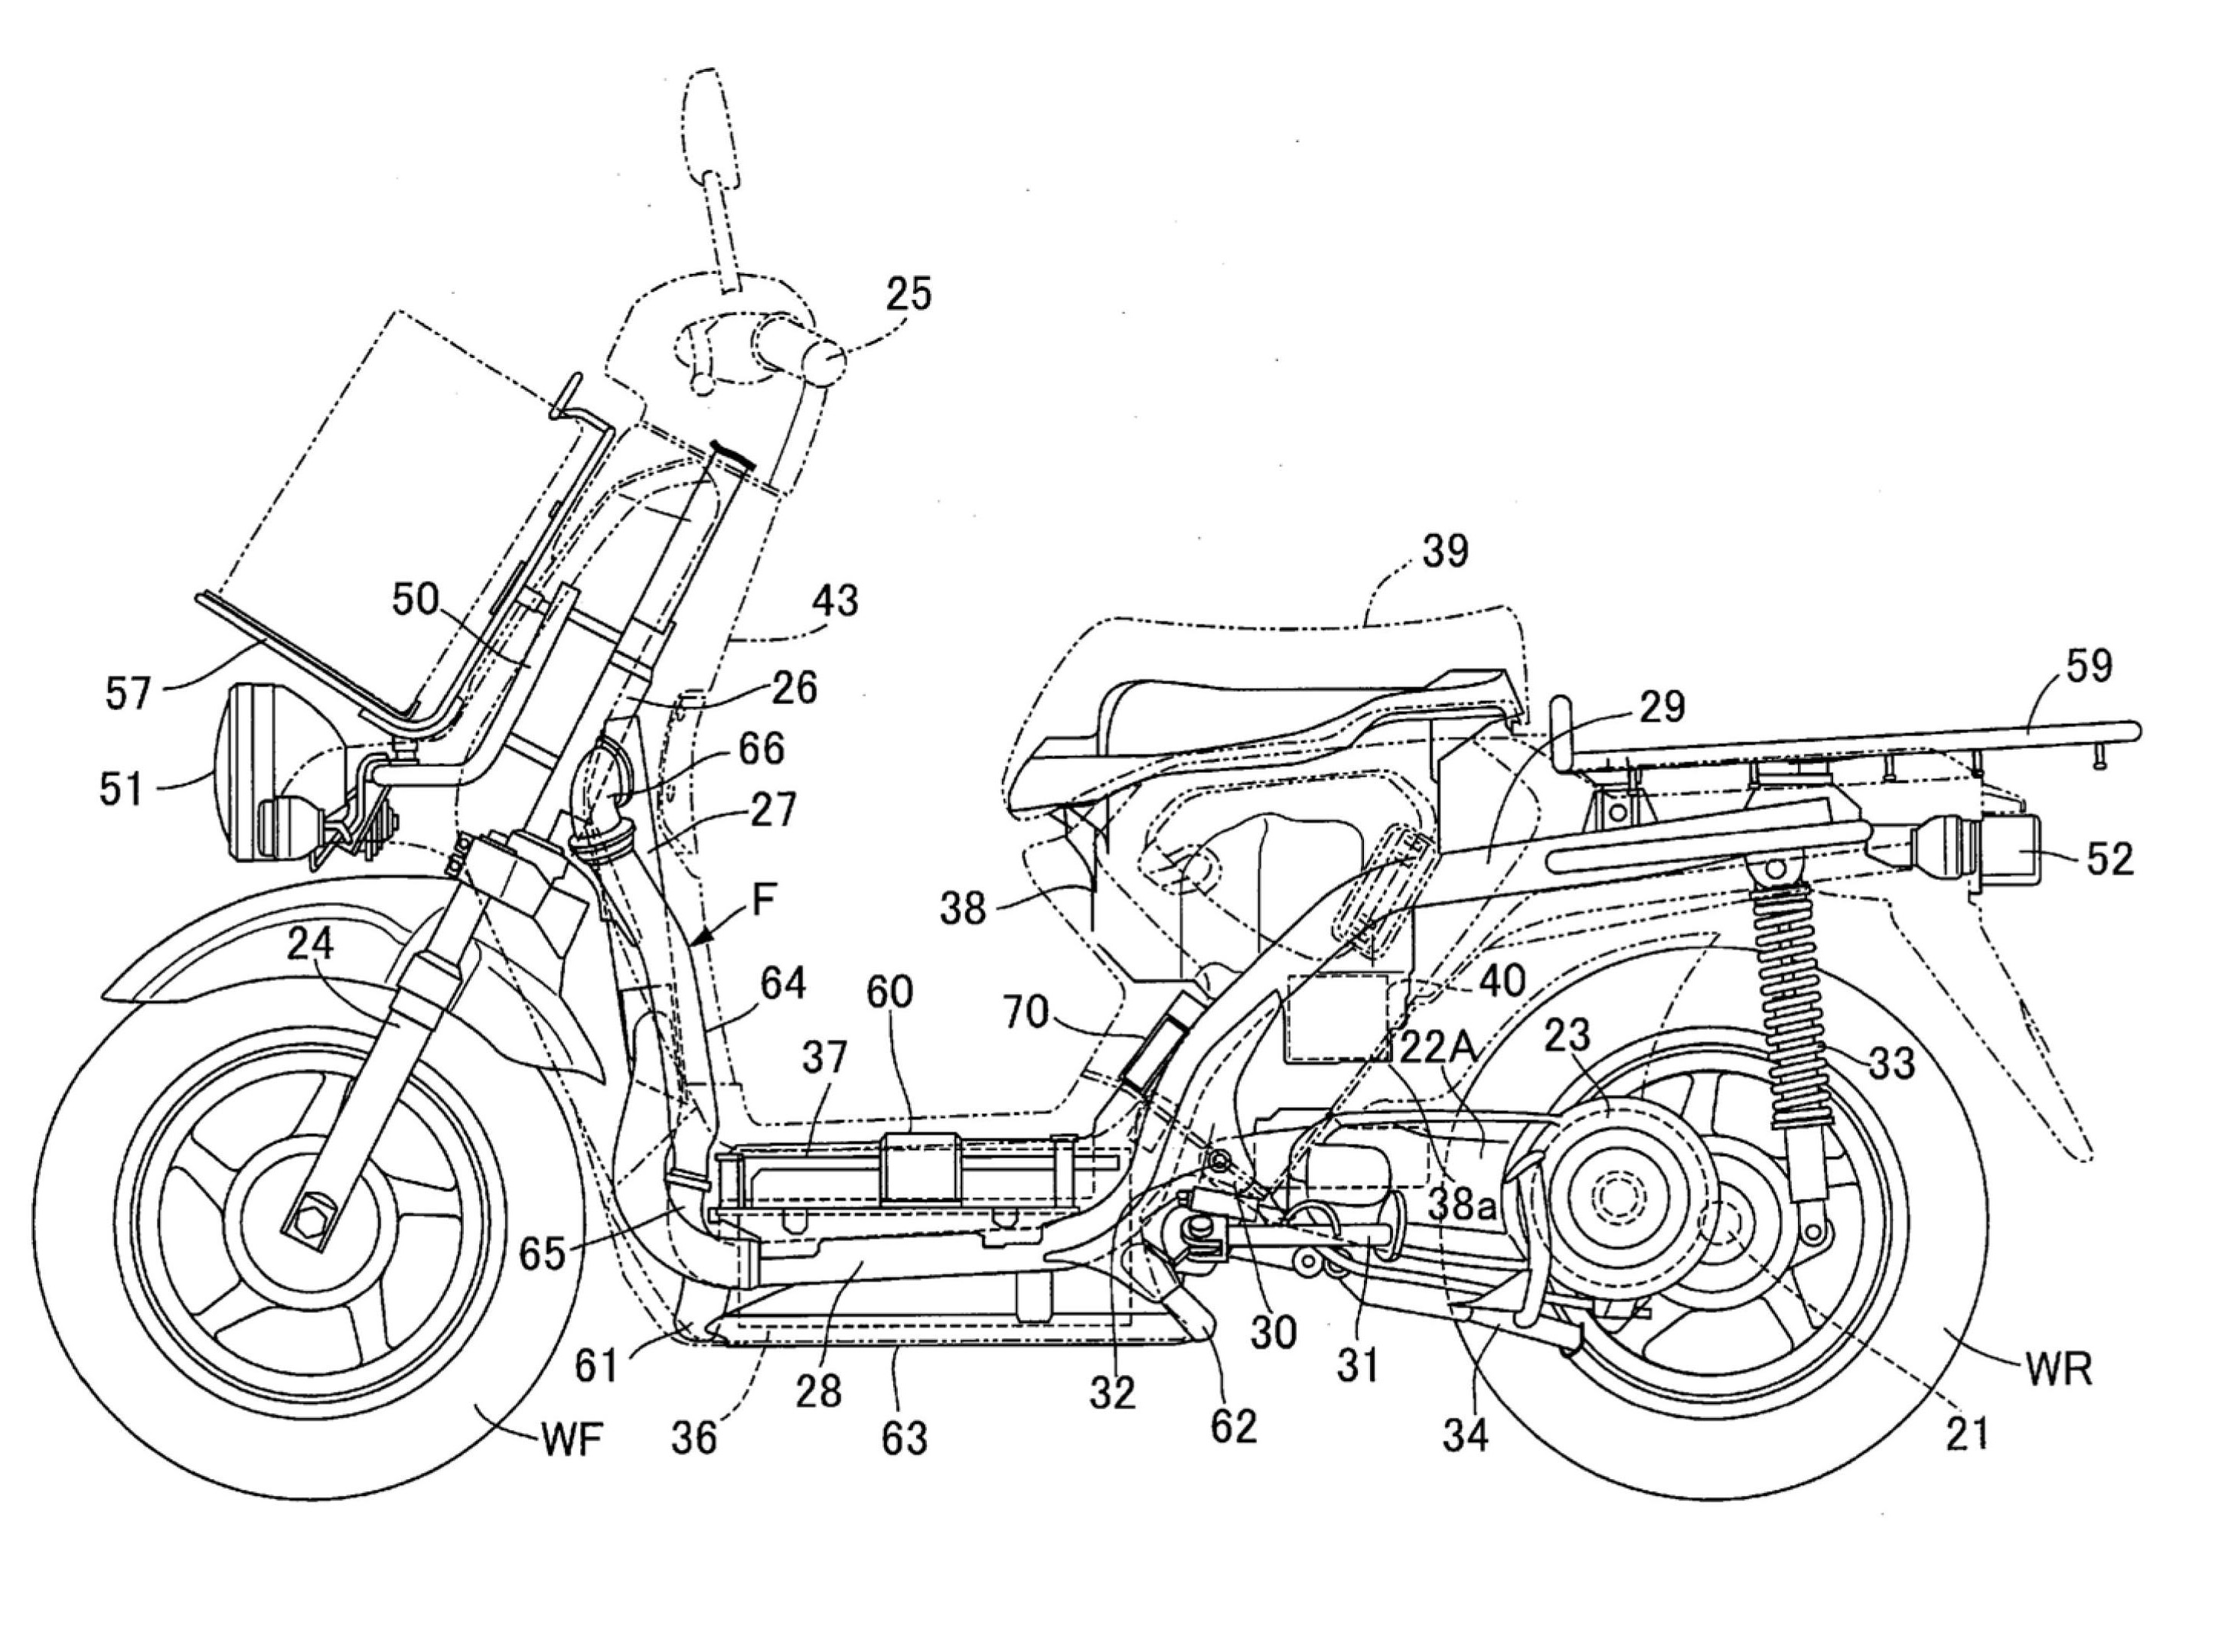 Speed sensor installation structure in a vehicle